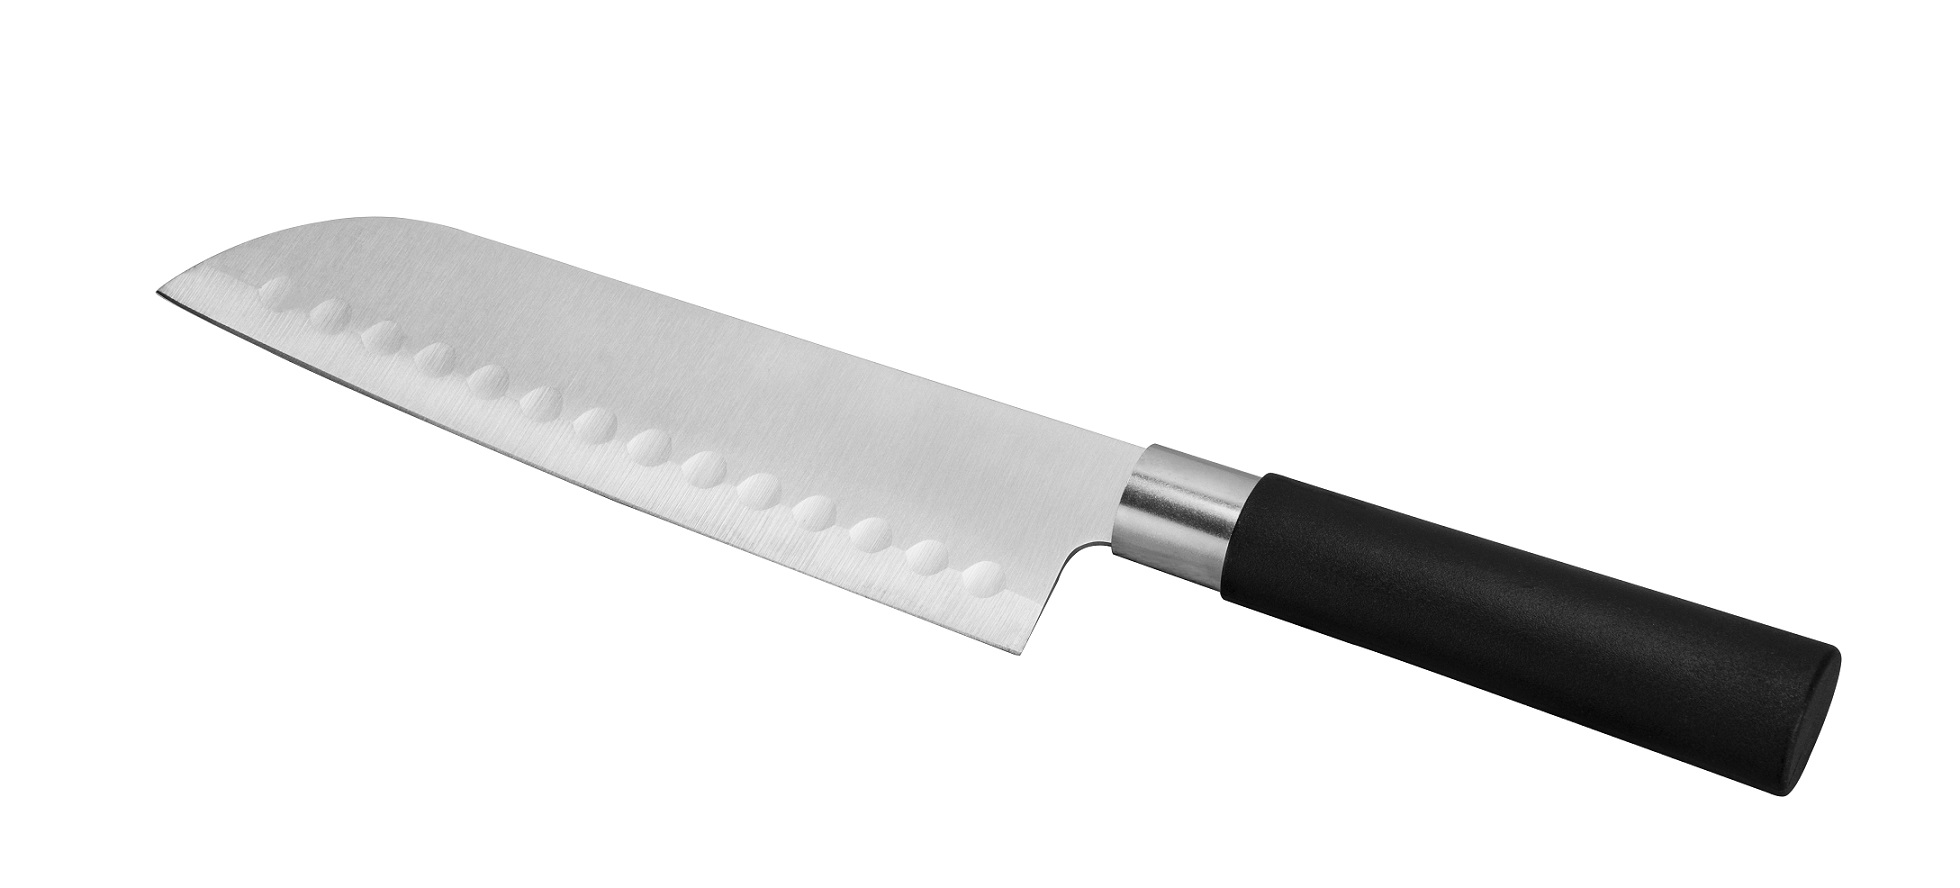 JAPANESE CHEF'S KNIFE WITH BLACK HANDLE 29.5cm SANDED STAINLESS STEEL 1.5mm